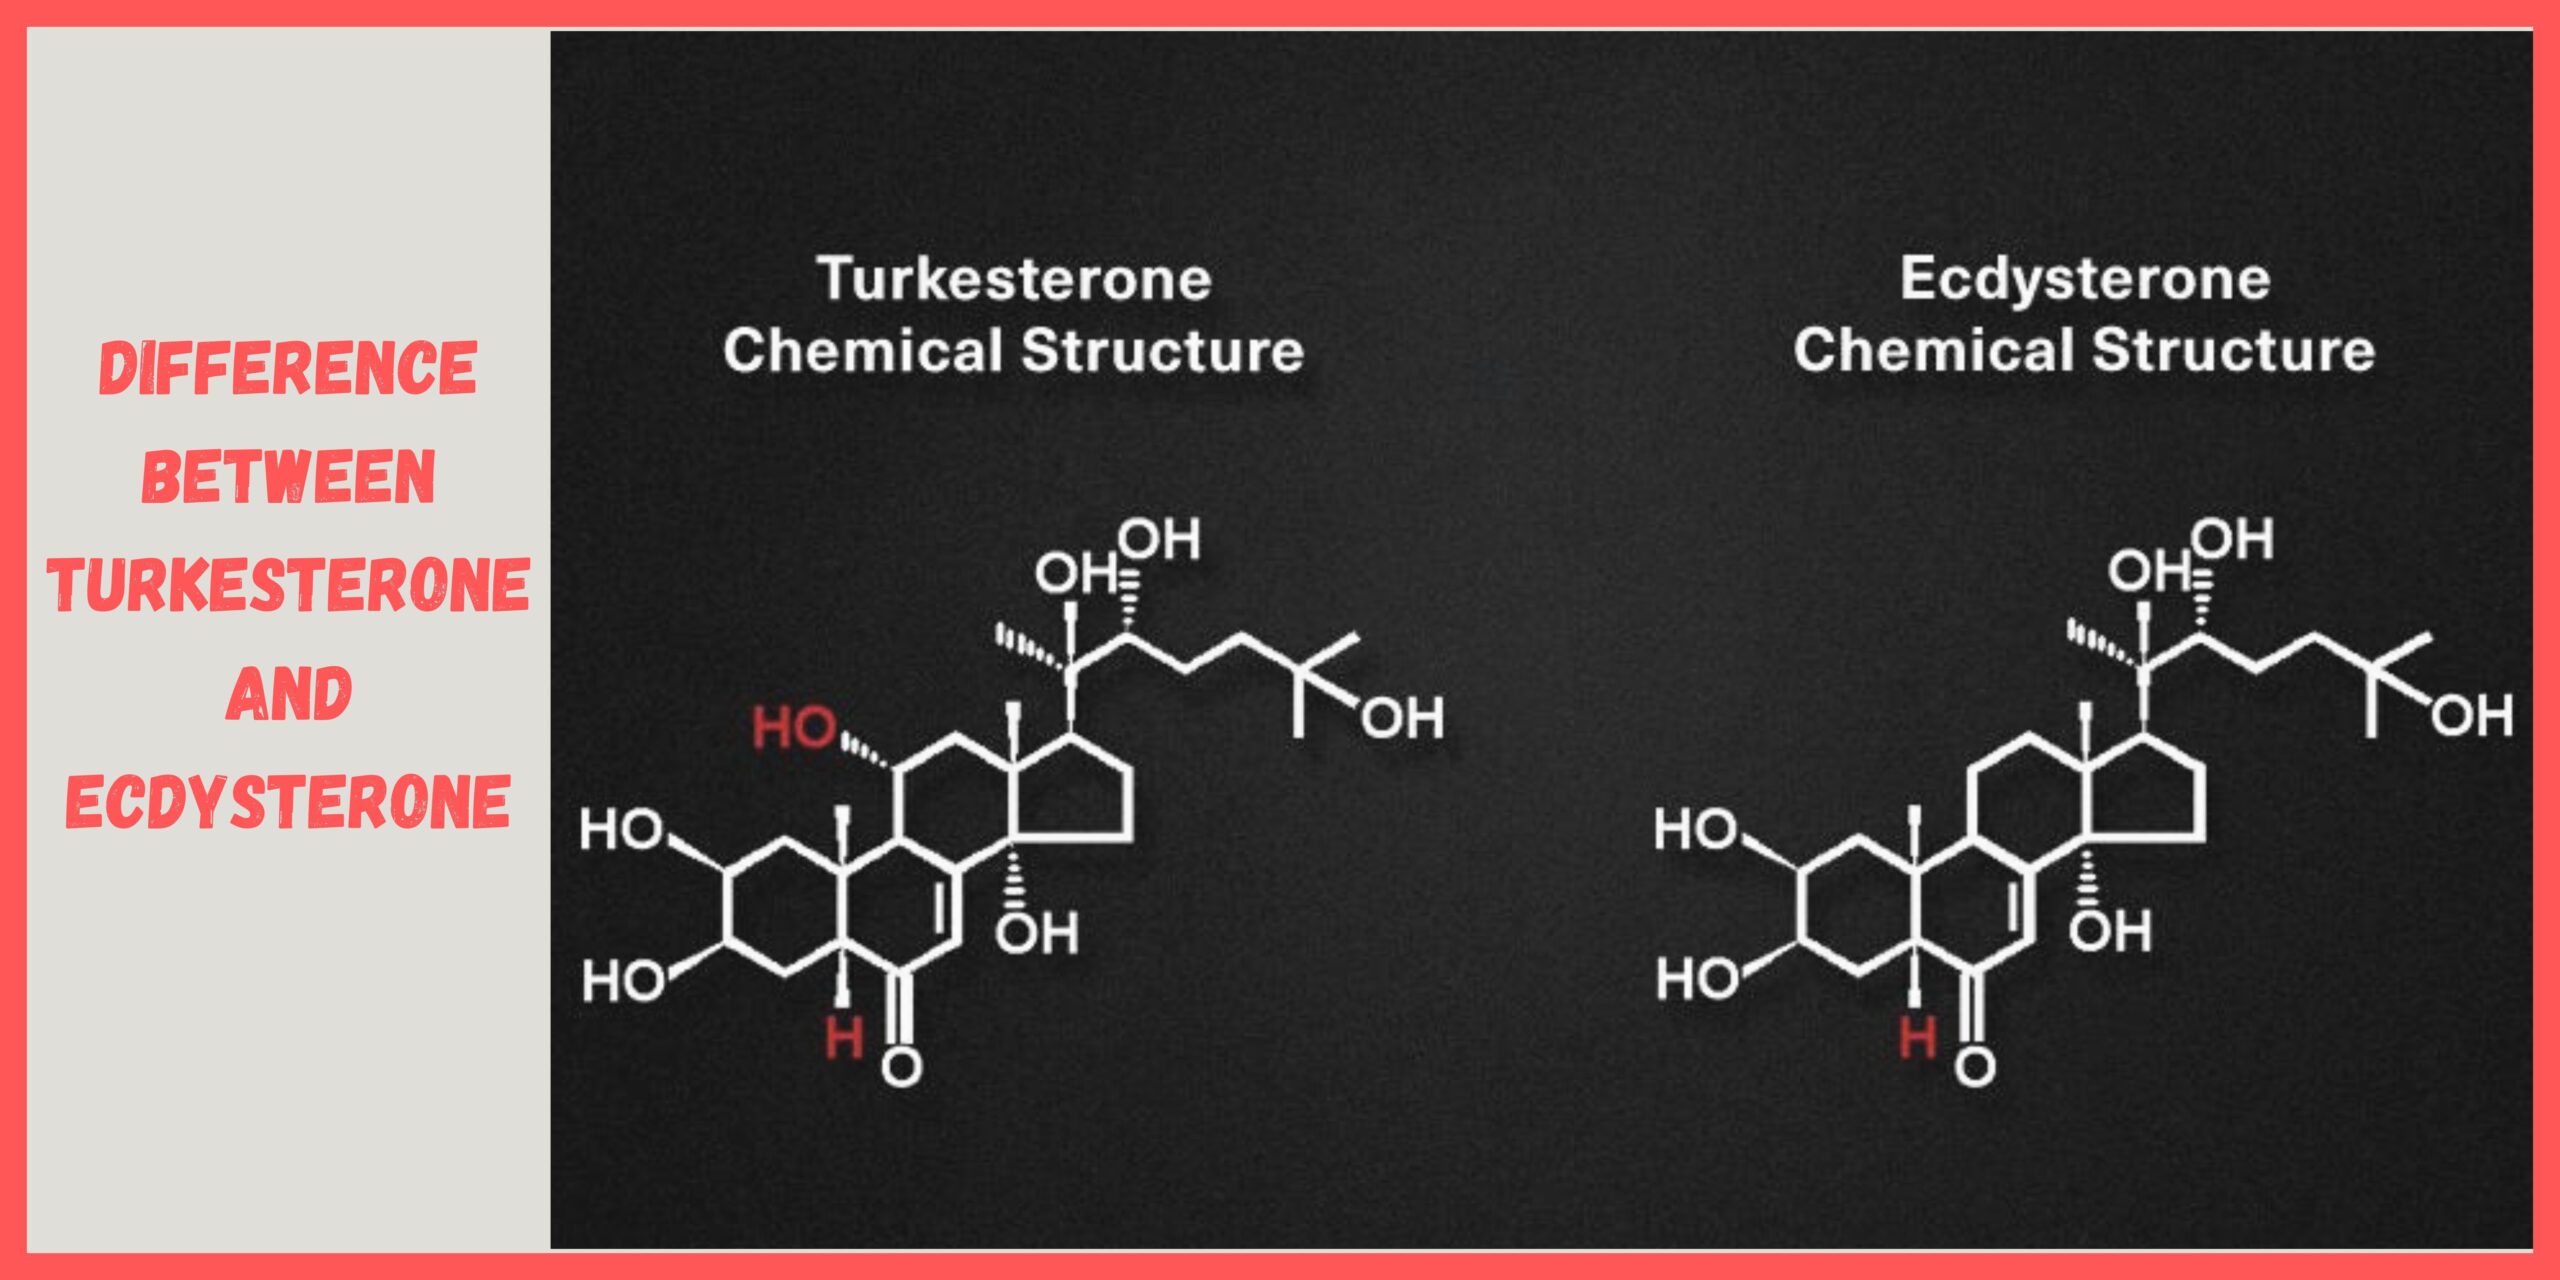 Difference Between Turkesterone and Ecdysterone